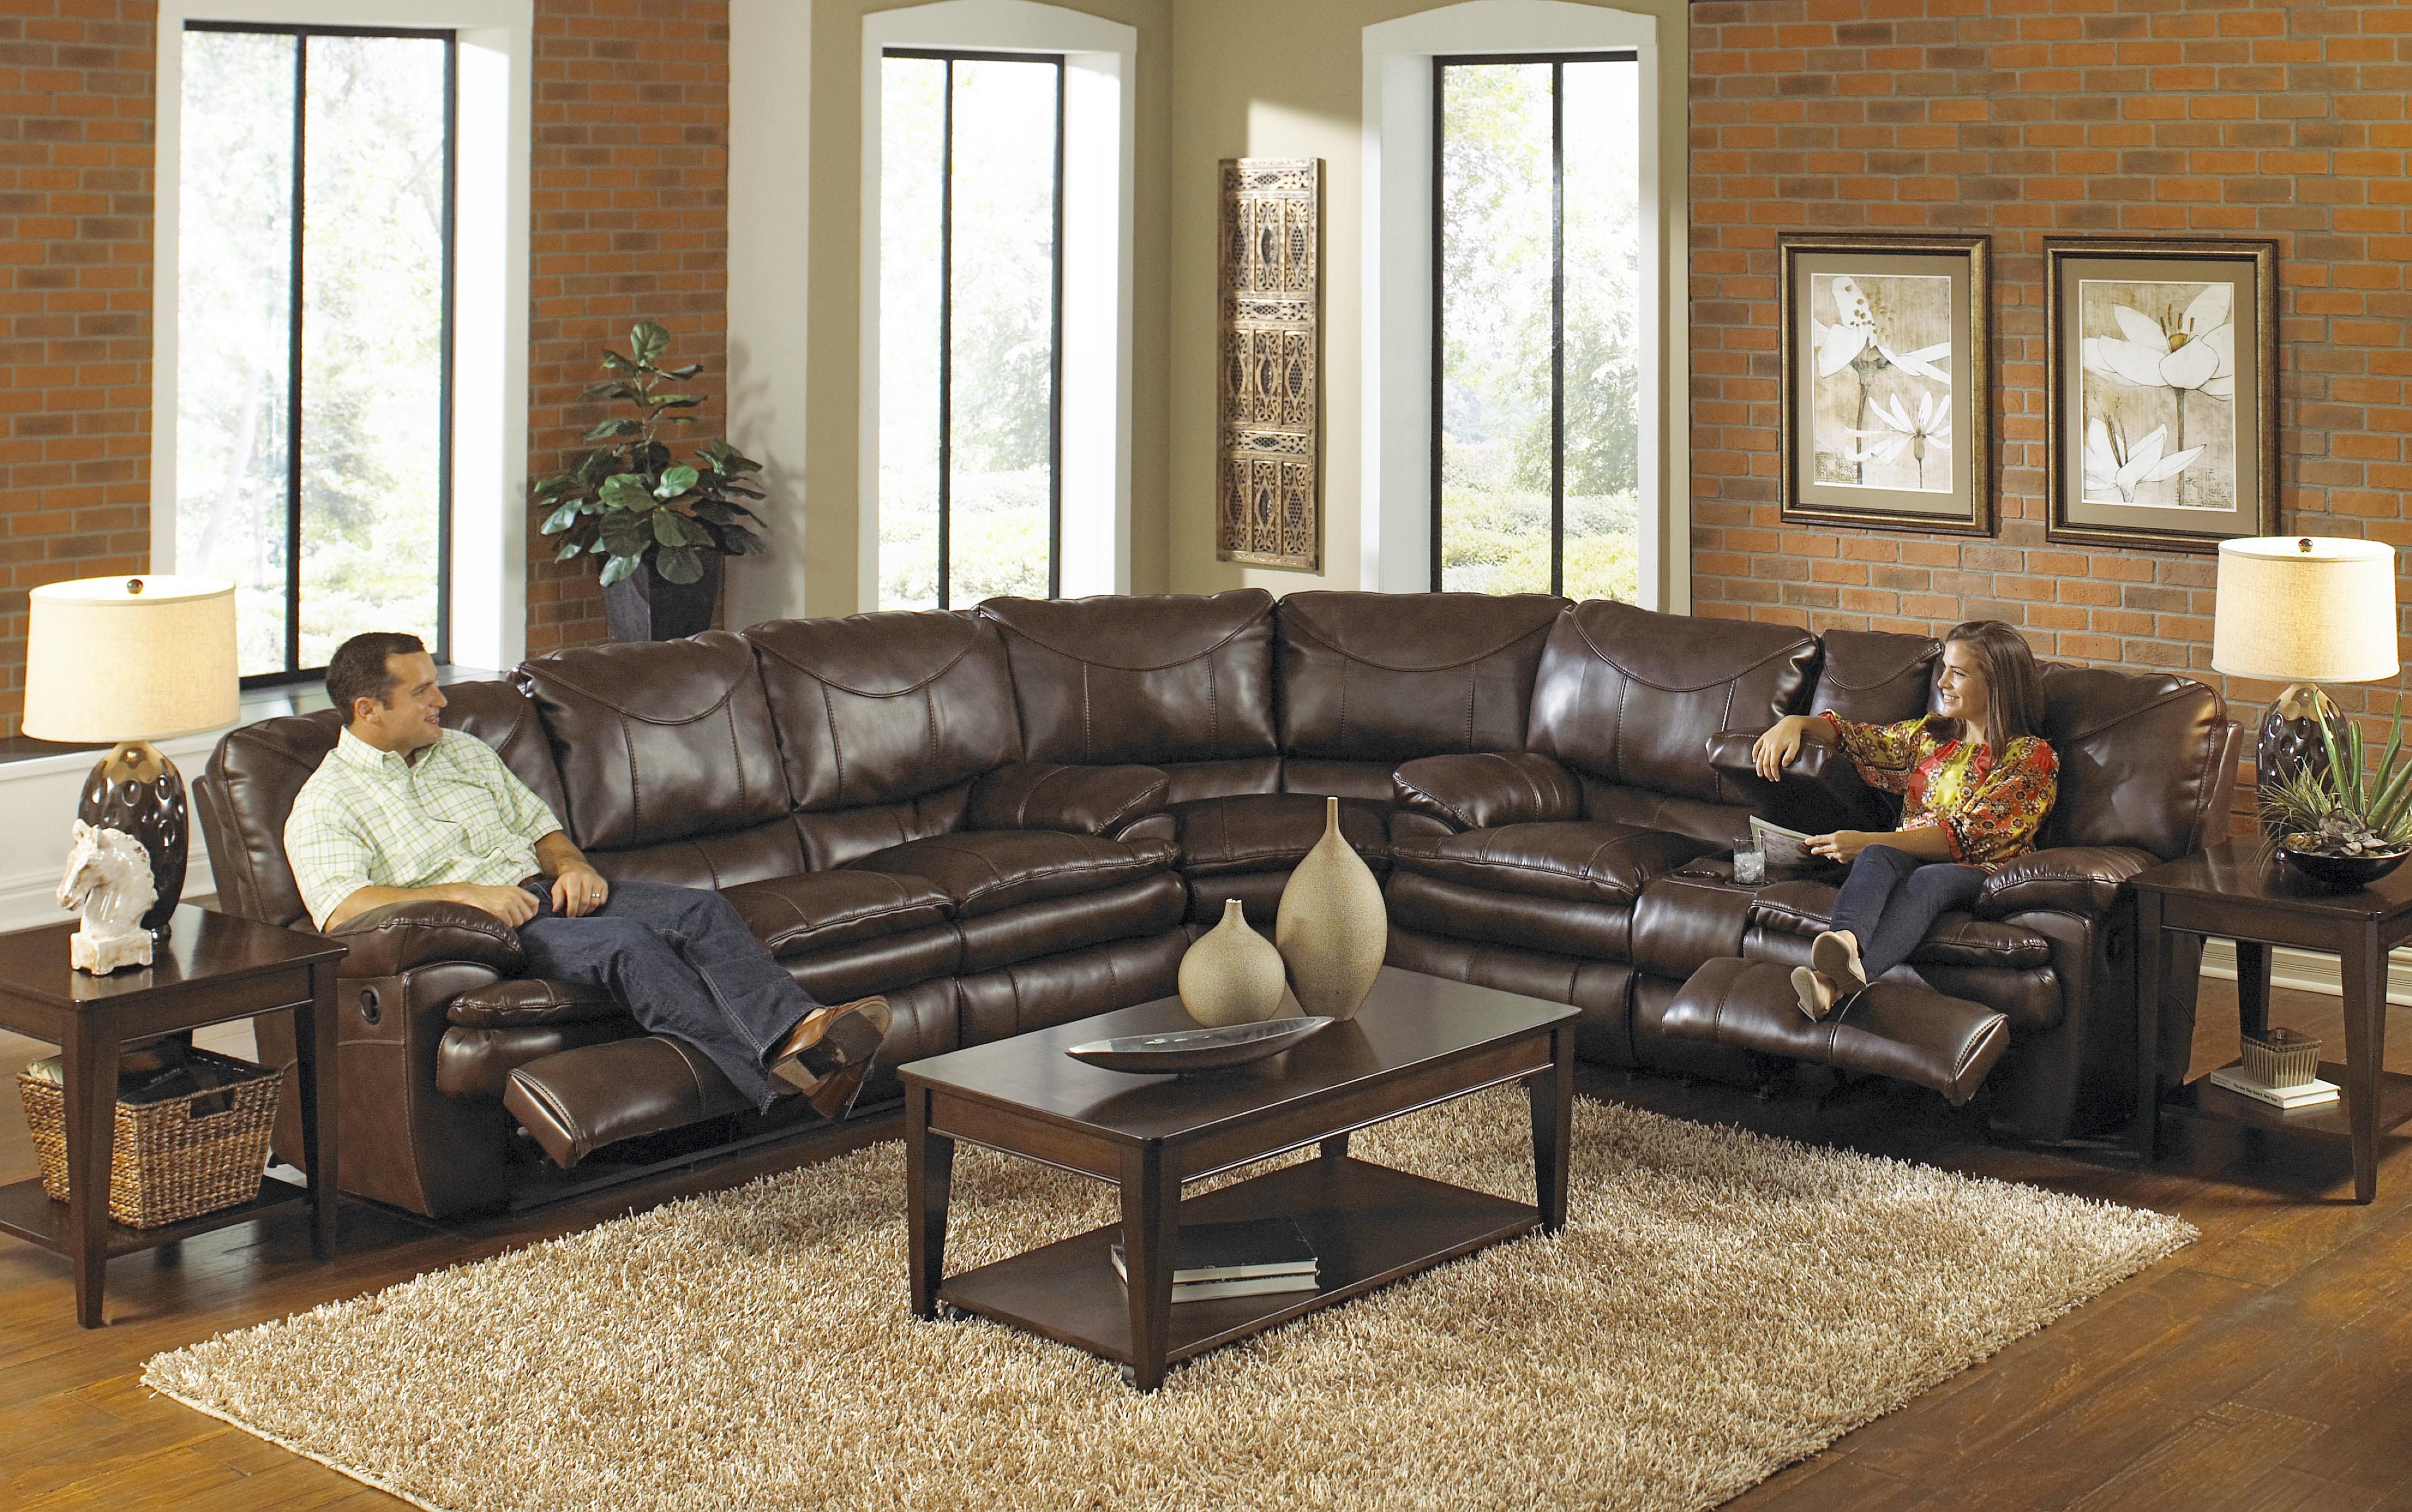 Buy large sectional sofas perfect for your large living room